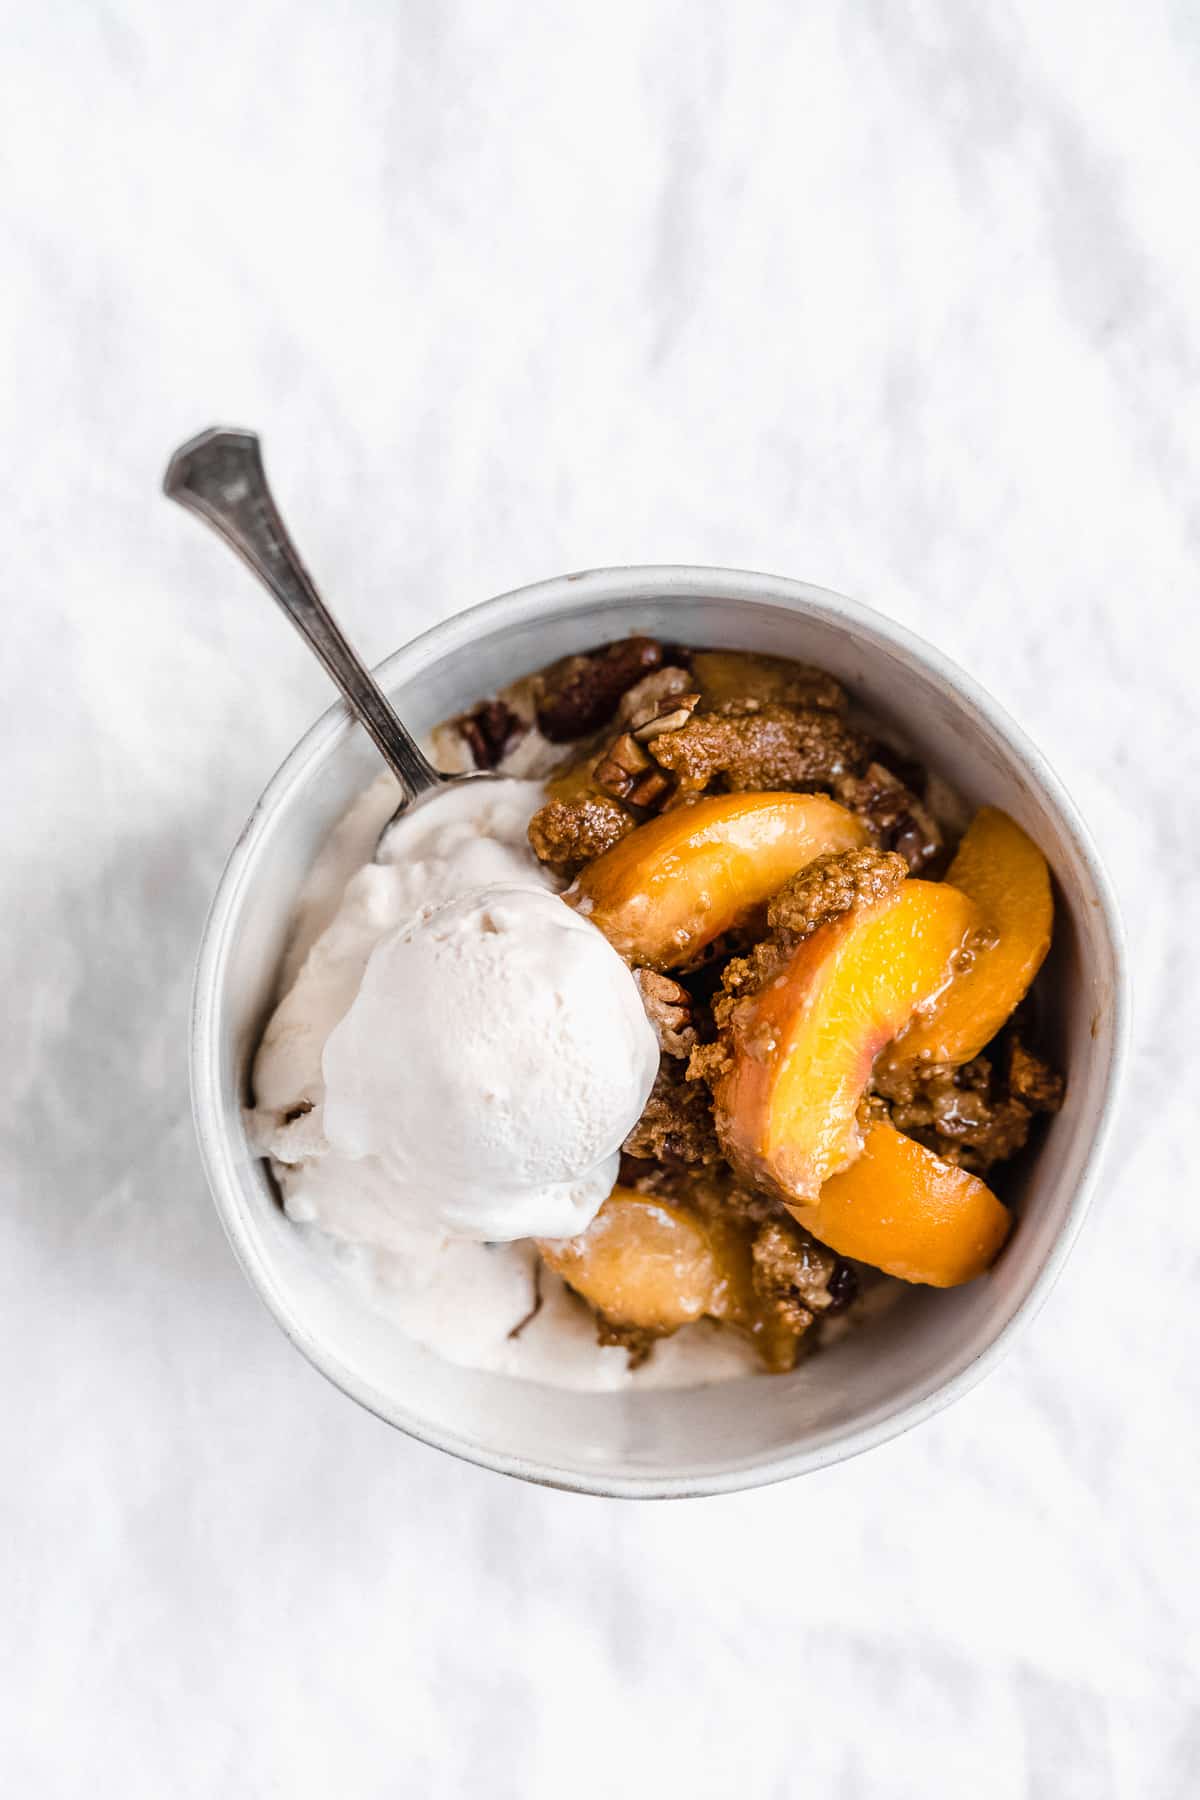 Overhead photo of the freshly baked Gluten-free Peach Cobbler Skillet served in a white bowl and topped with a scoop of vanilla ice cream.  A spoon is in the bowl.  